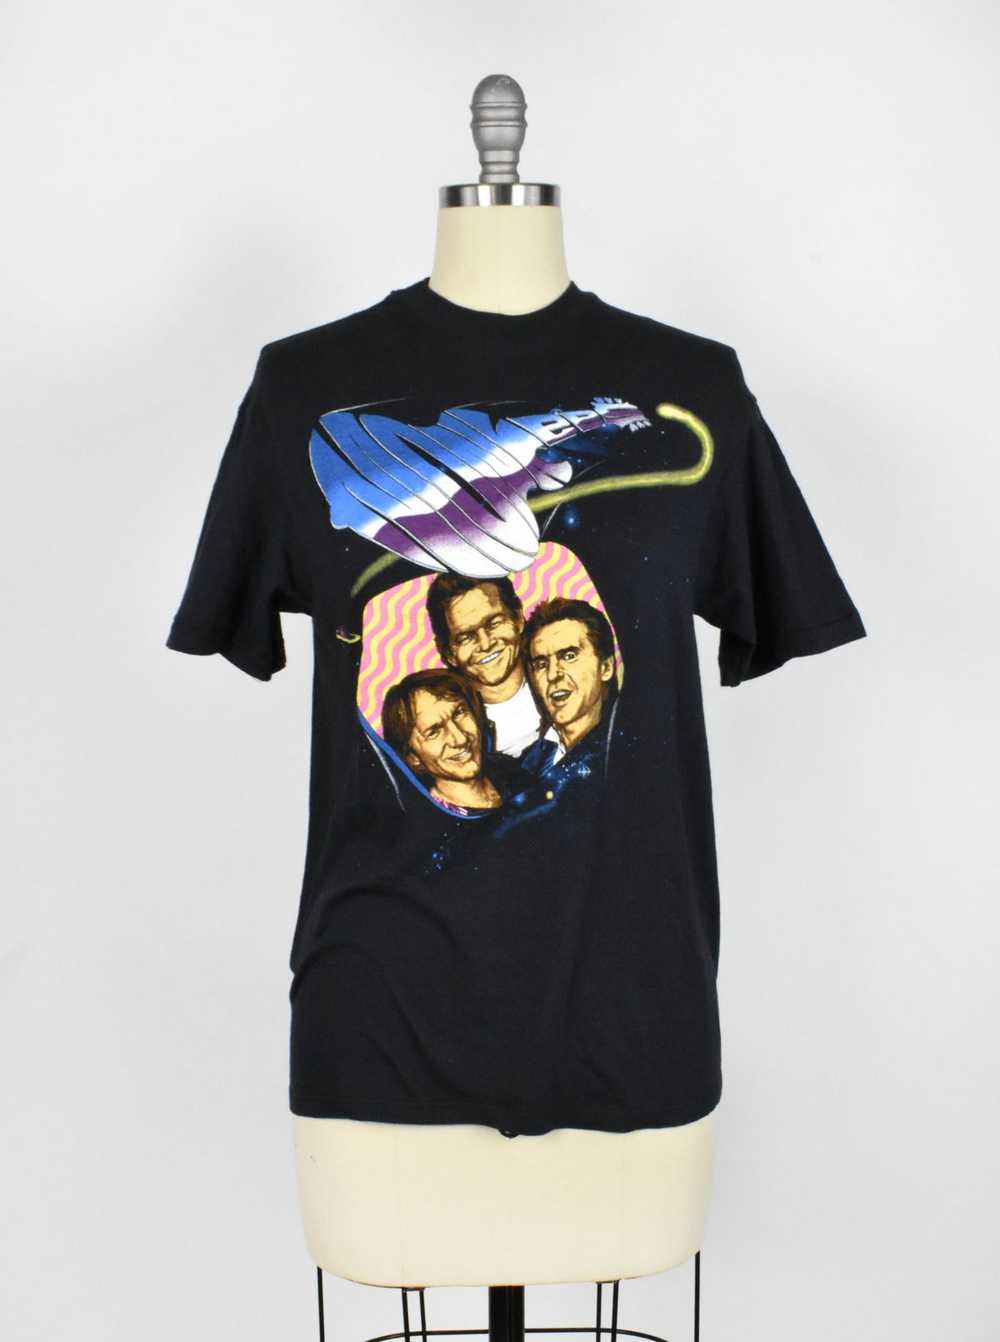 THE MONKEES T-Shirt, Size Medium, Made in the USA - Gem